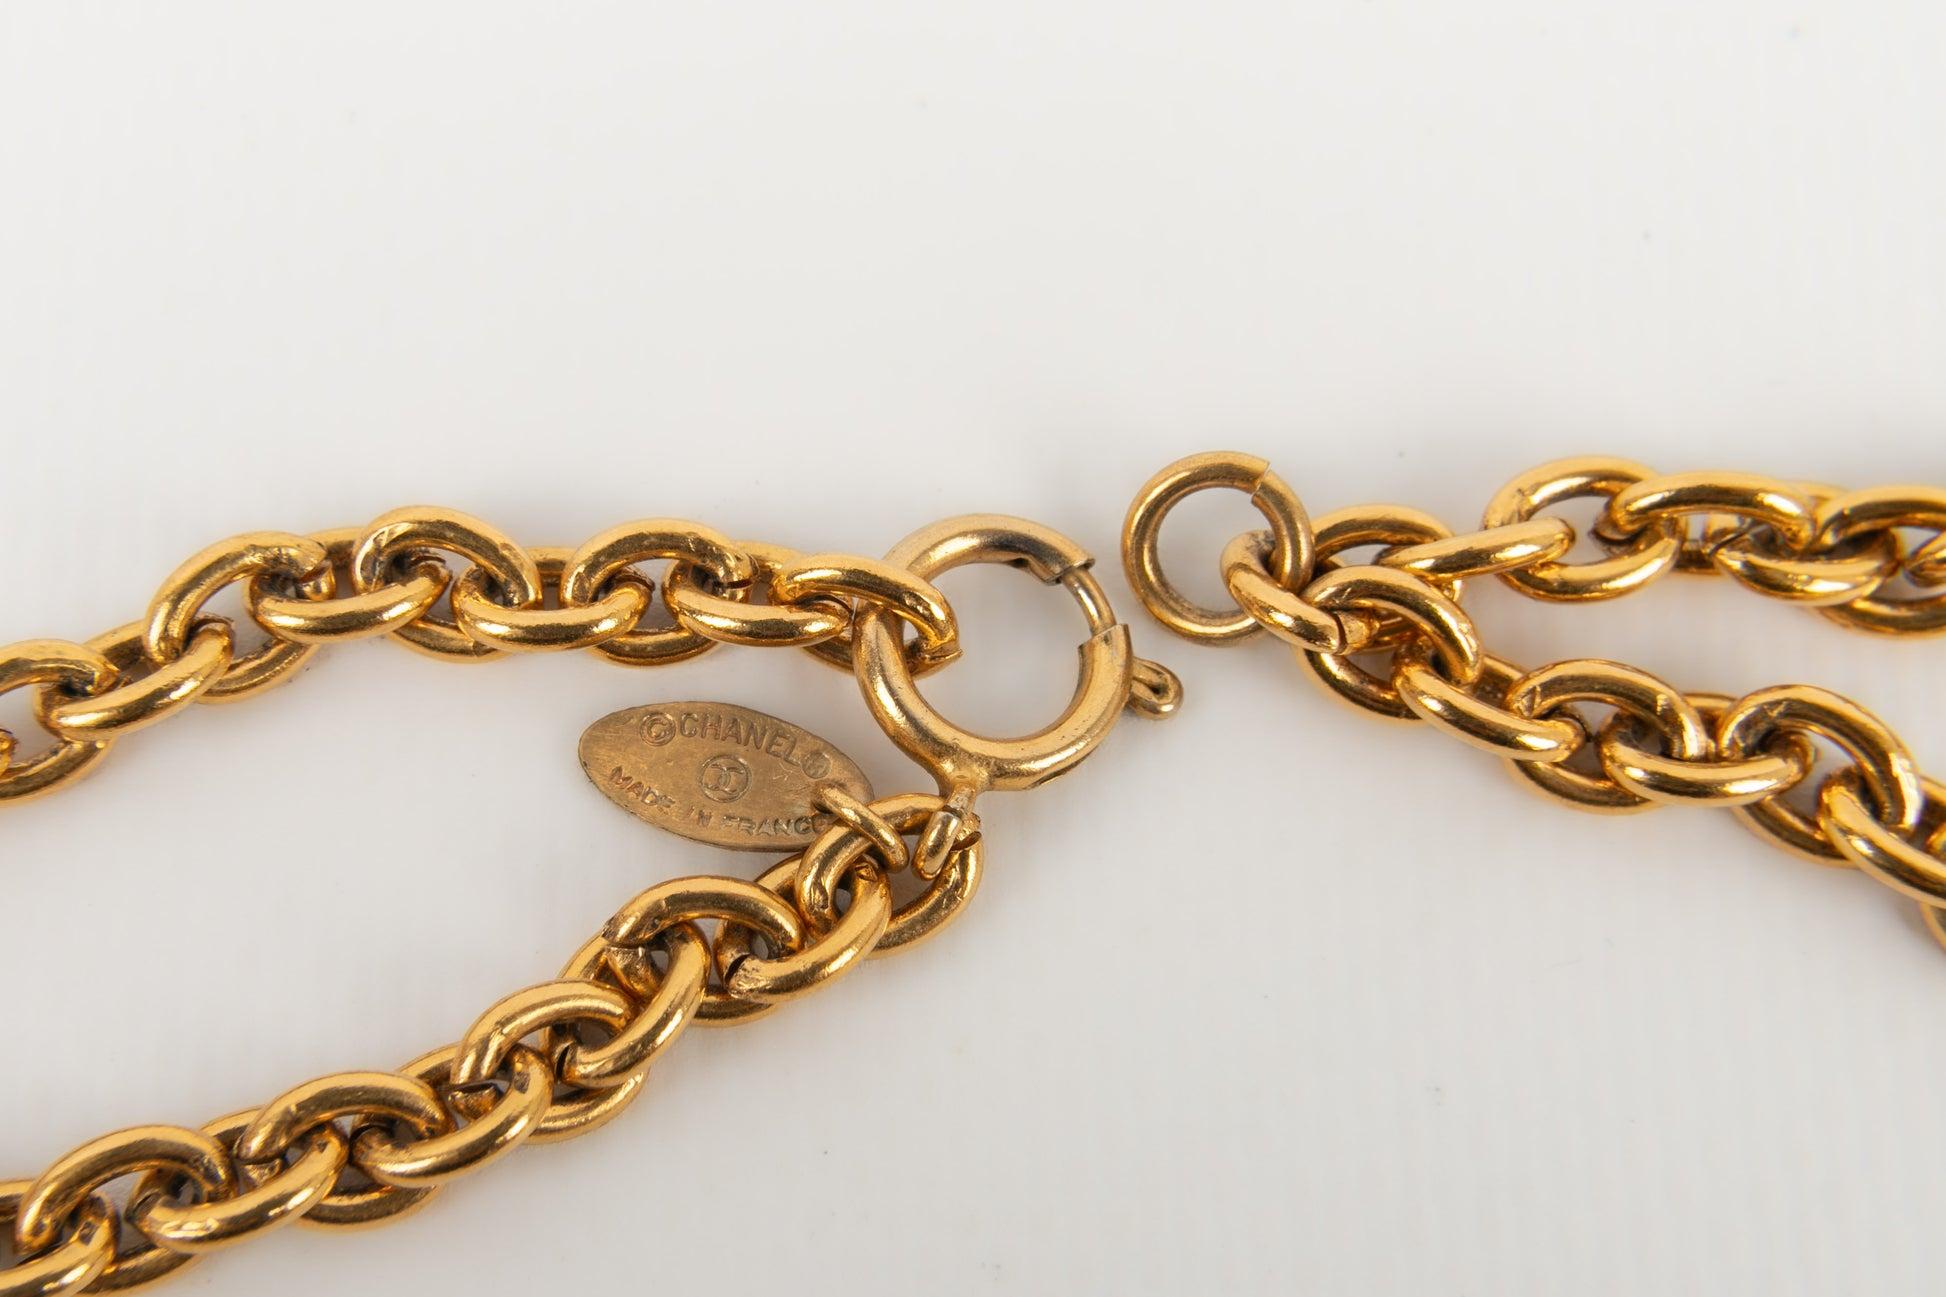 Chanel  Necklace in Golden Metal with Quilted Elements, 1990s For Sale 4